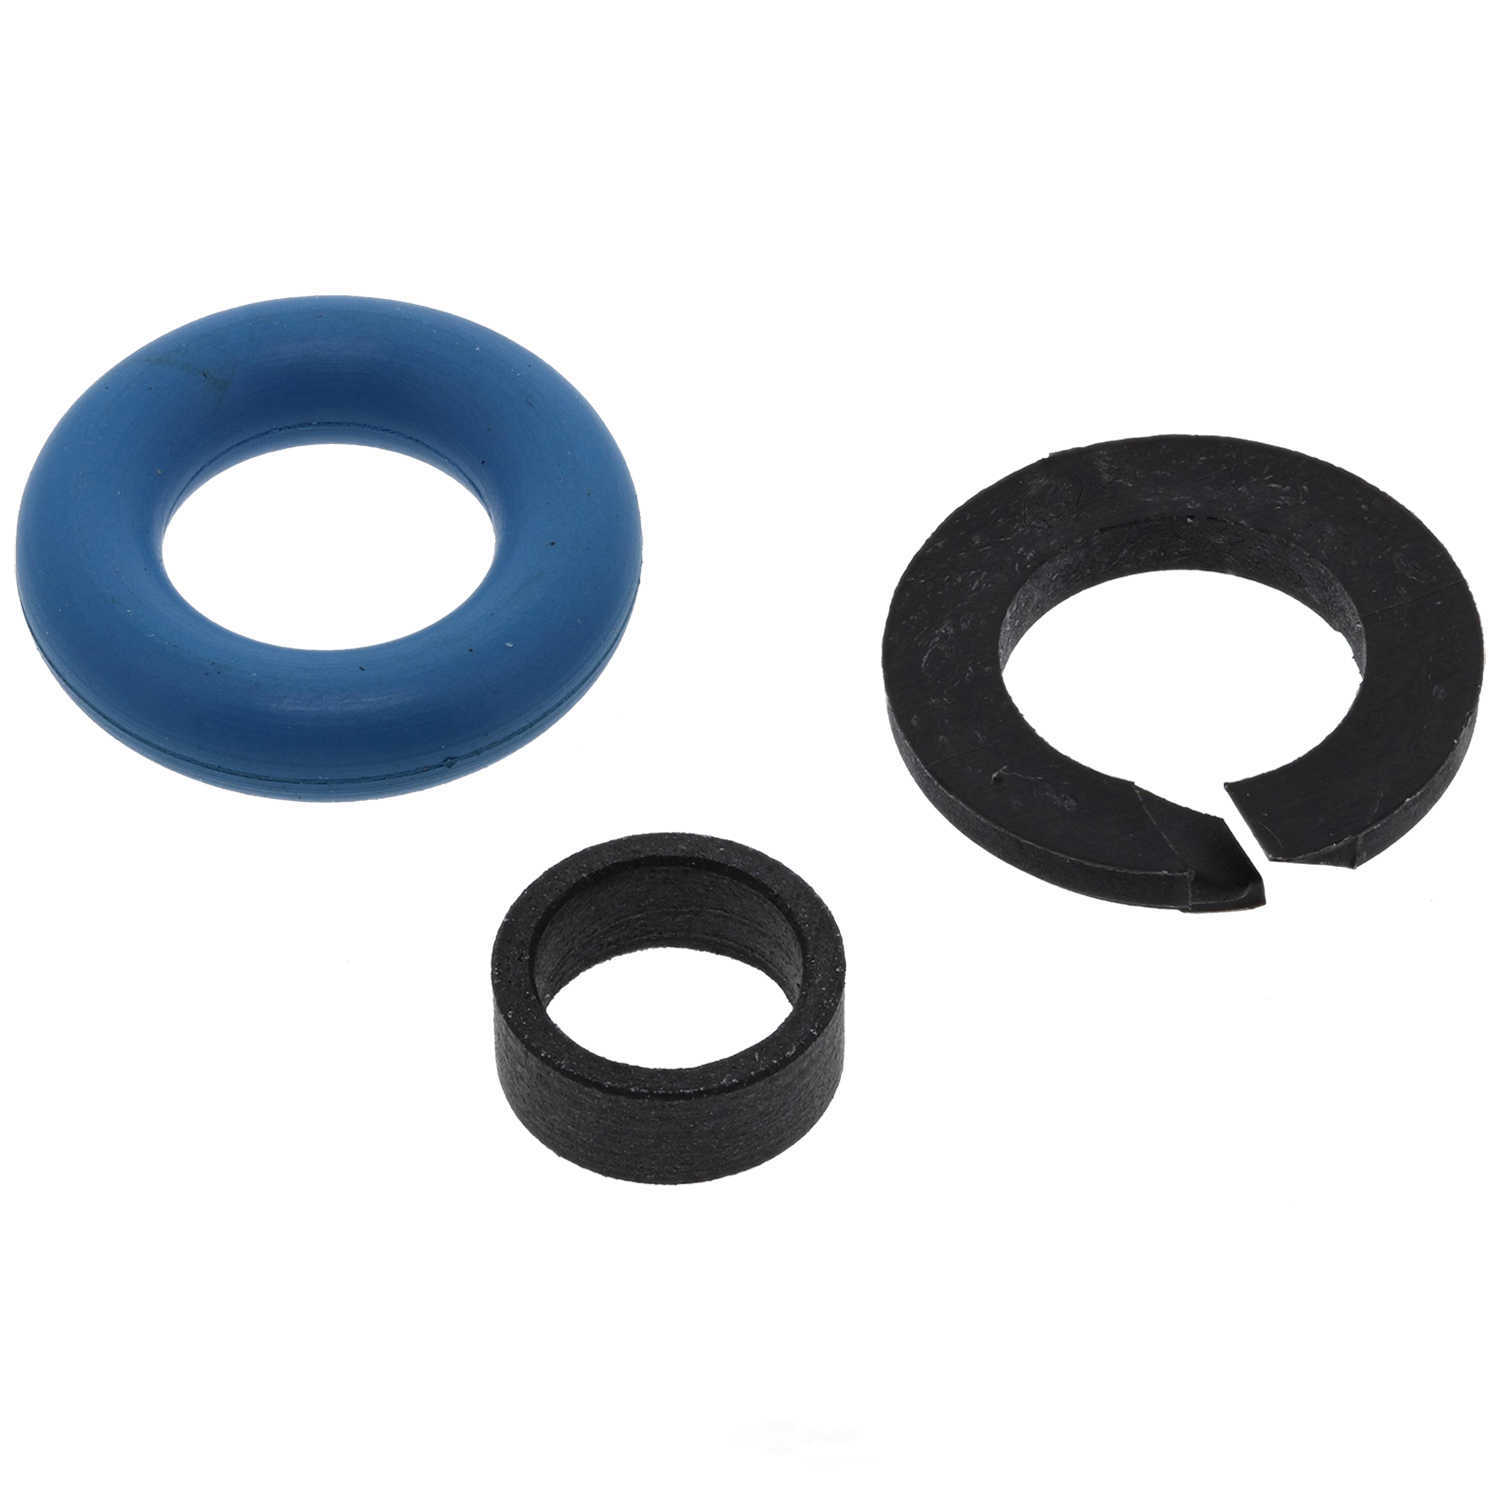 GB REMANUFACTURING INC. - Fuel Injector Seal Kit - GBR 8-060